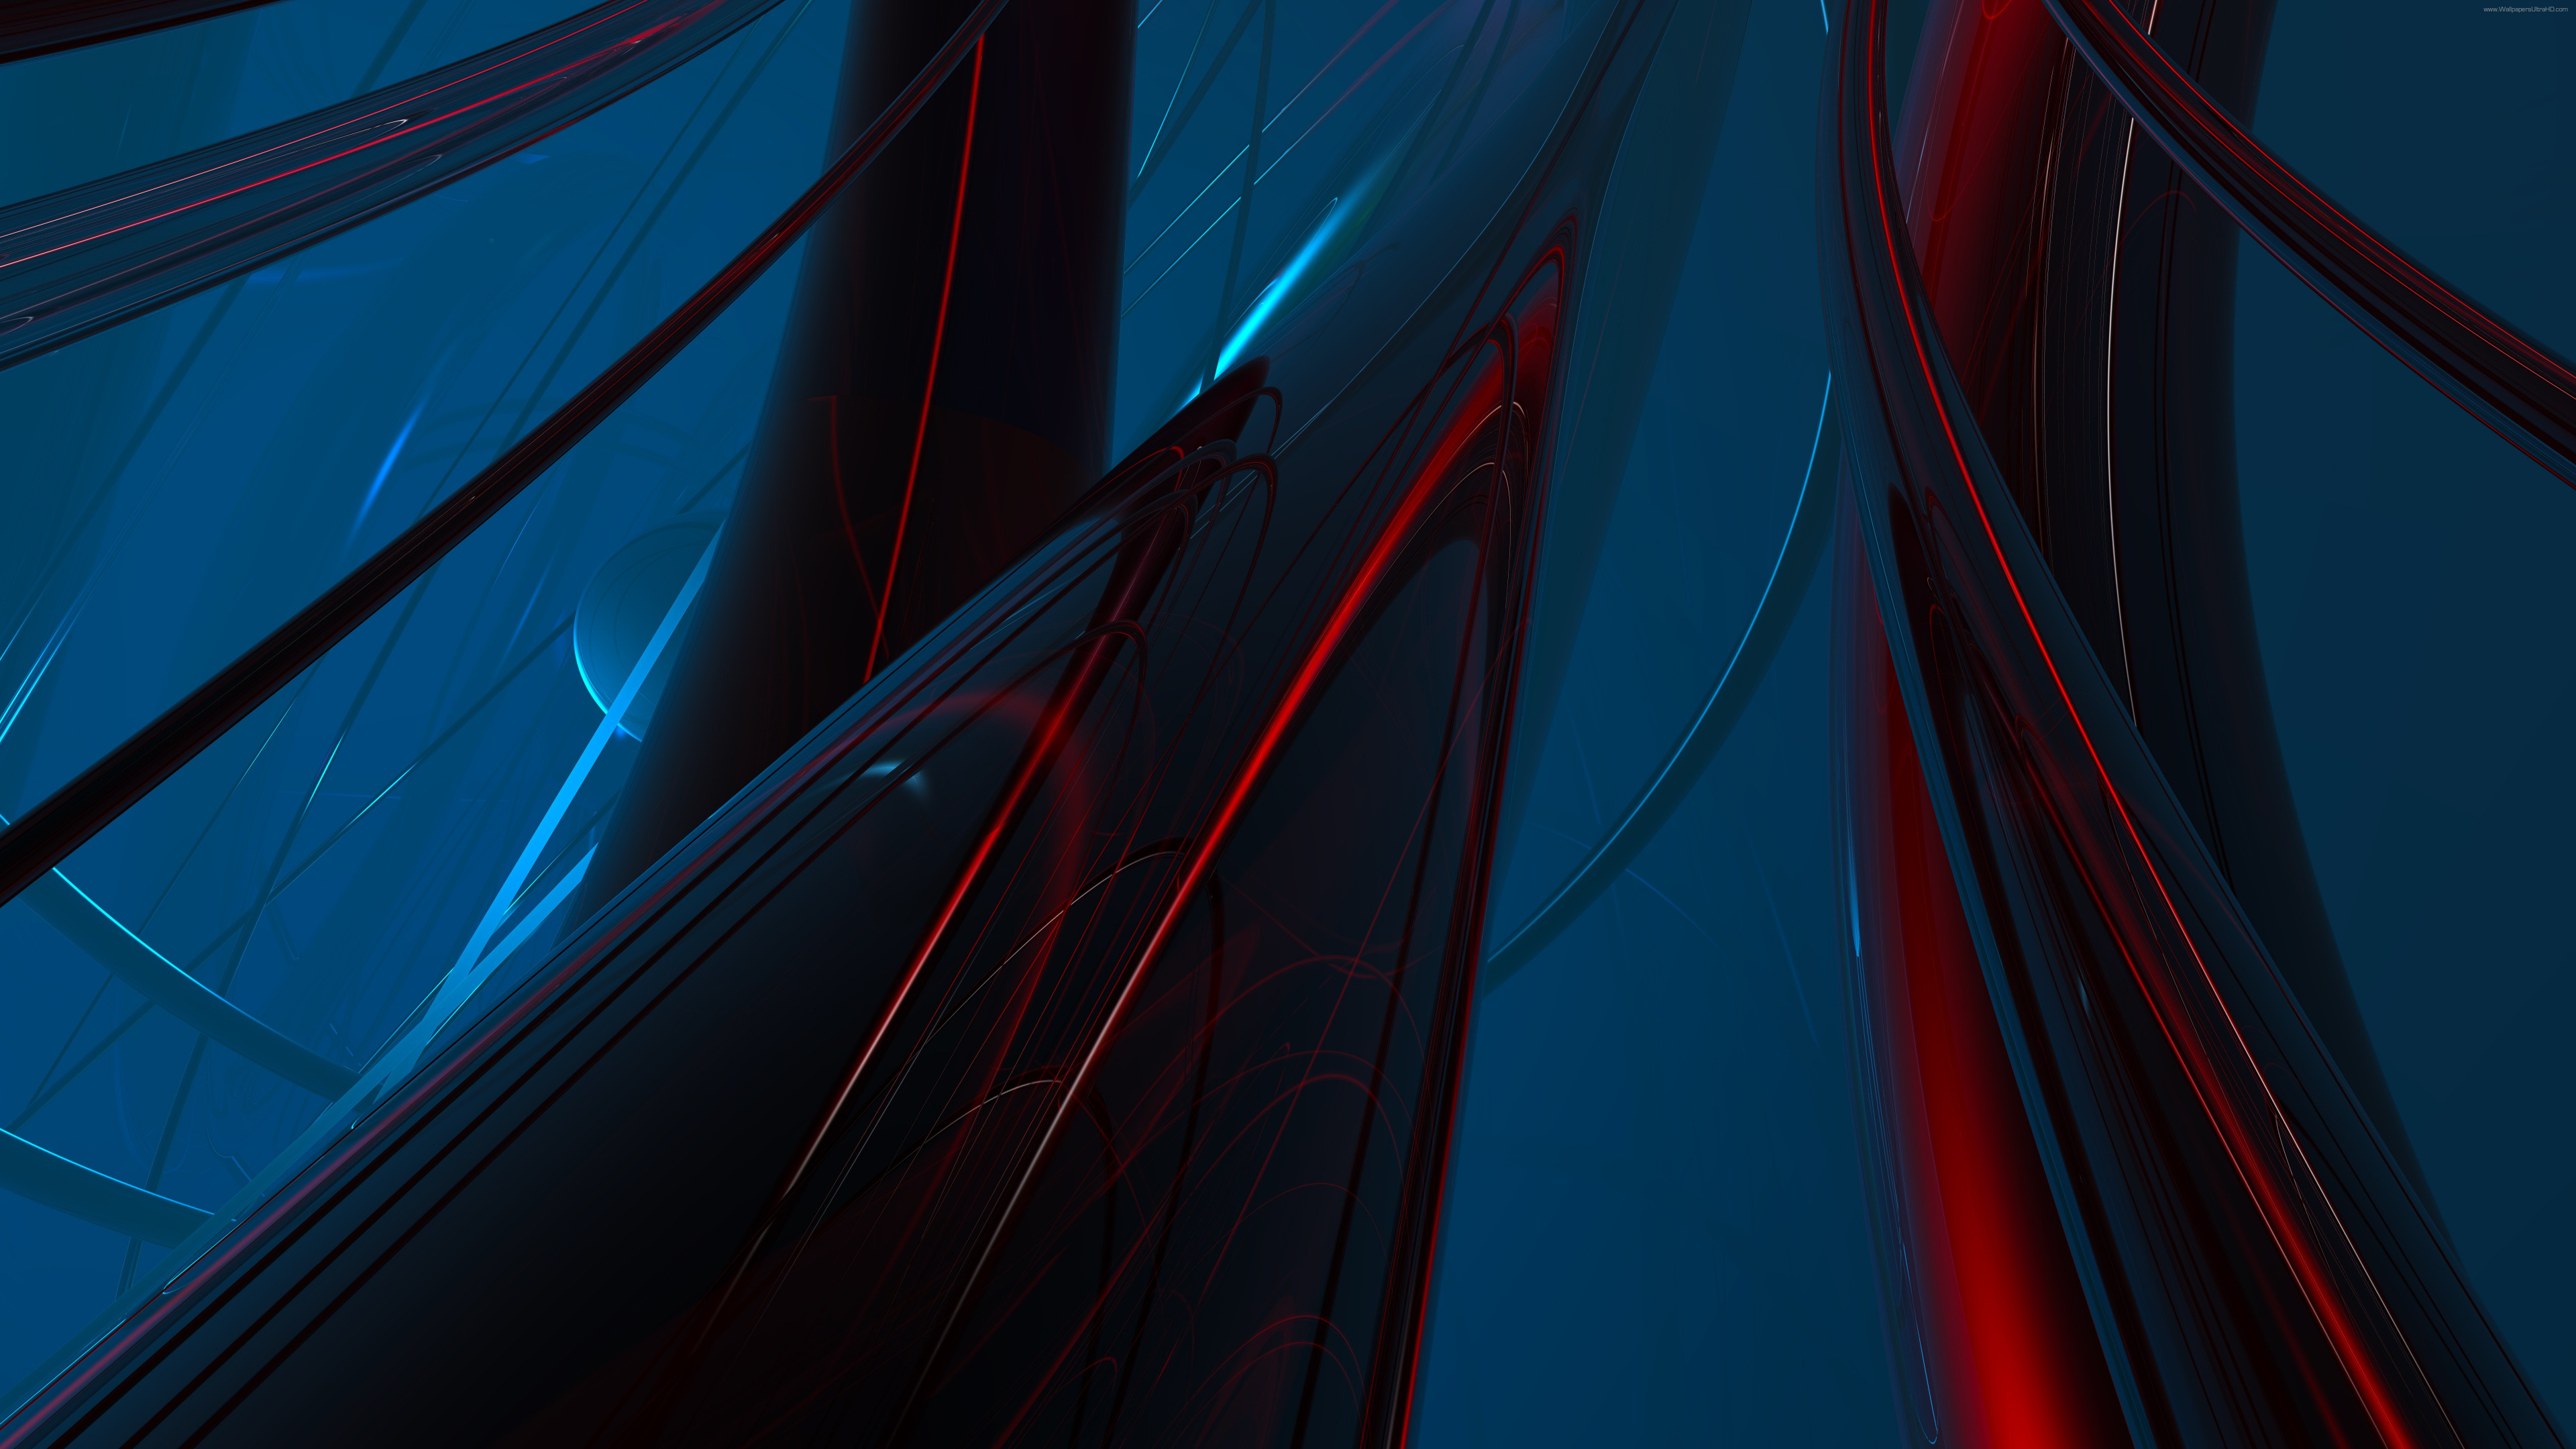 Blue and Red Light Streaks. Wallpaper in 3840x2160 Resolution